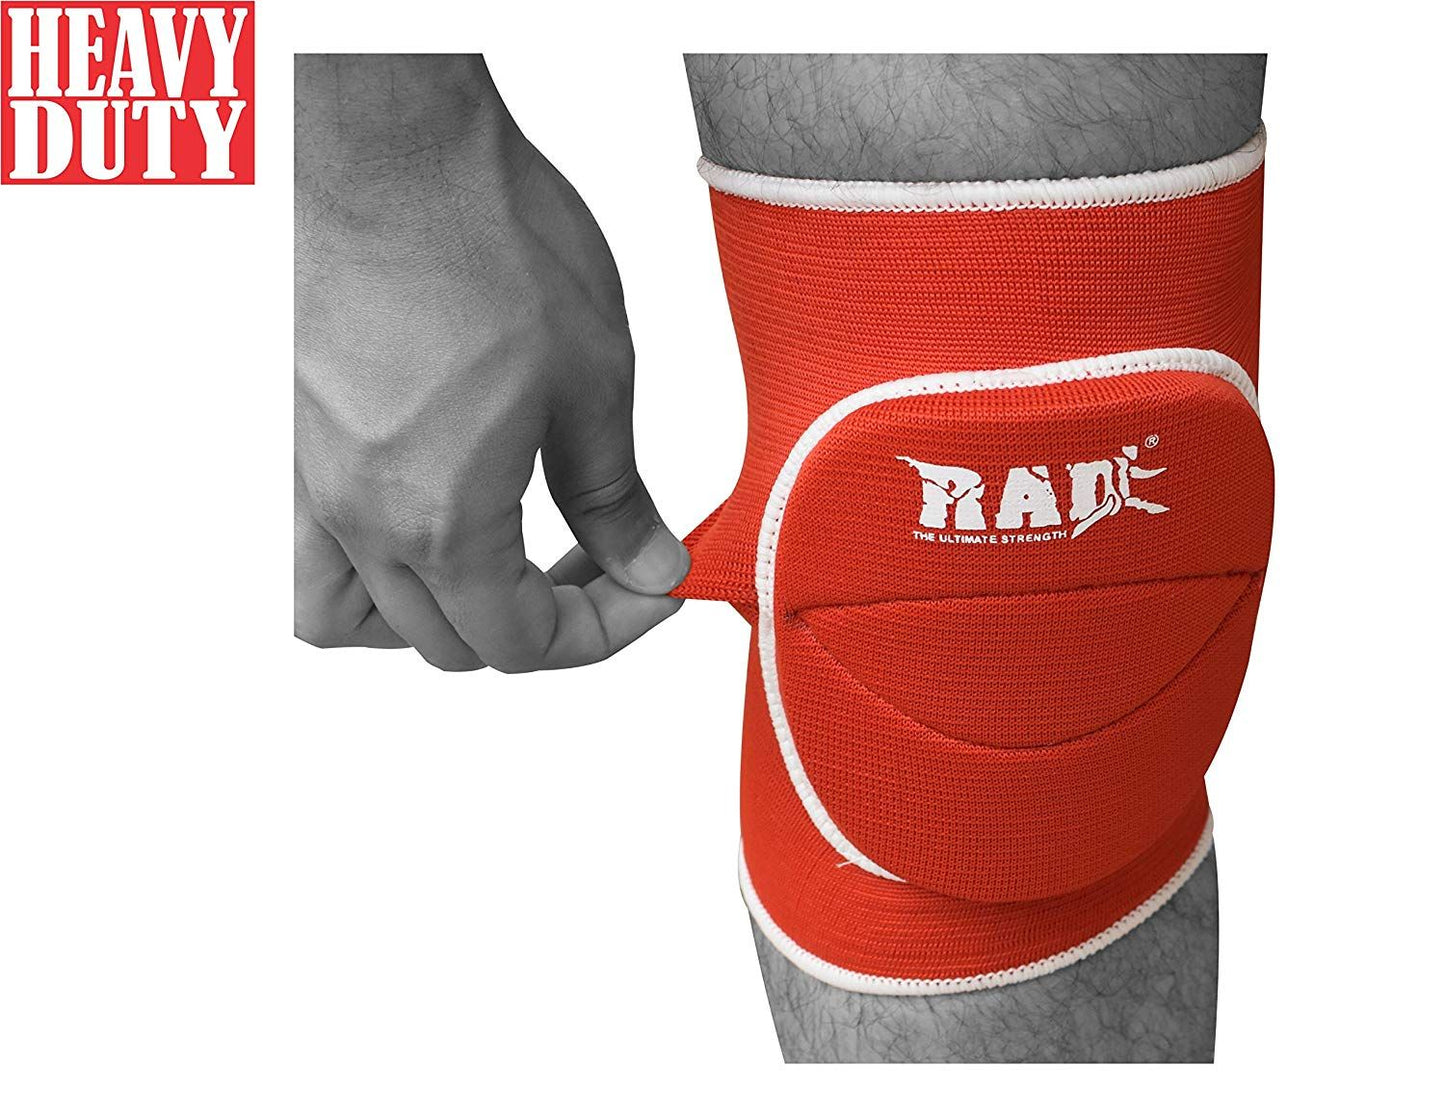 RAD Ultimate Strength RAD One Pair Polycotton Nonslip Elastic Fiber Knee Pads Protector Sports Volleyball Football Gym